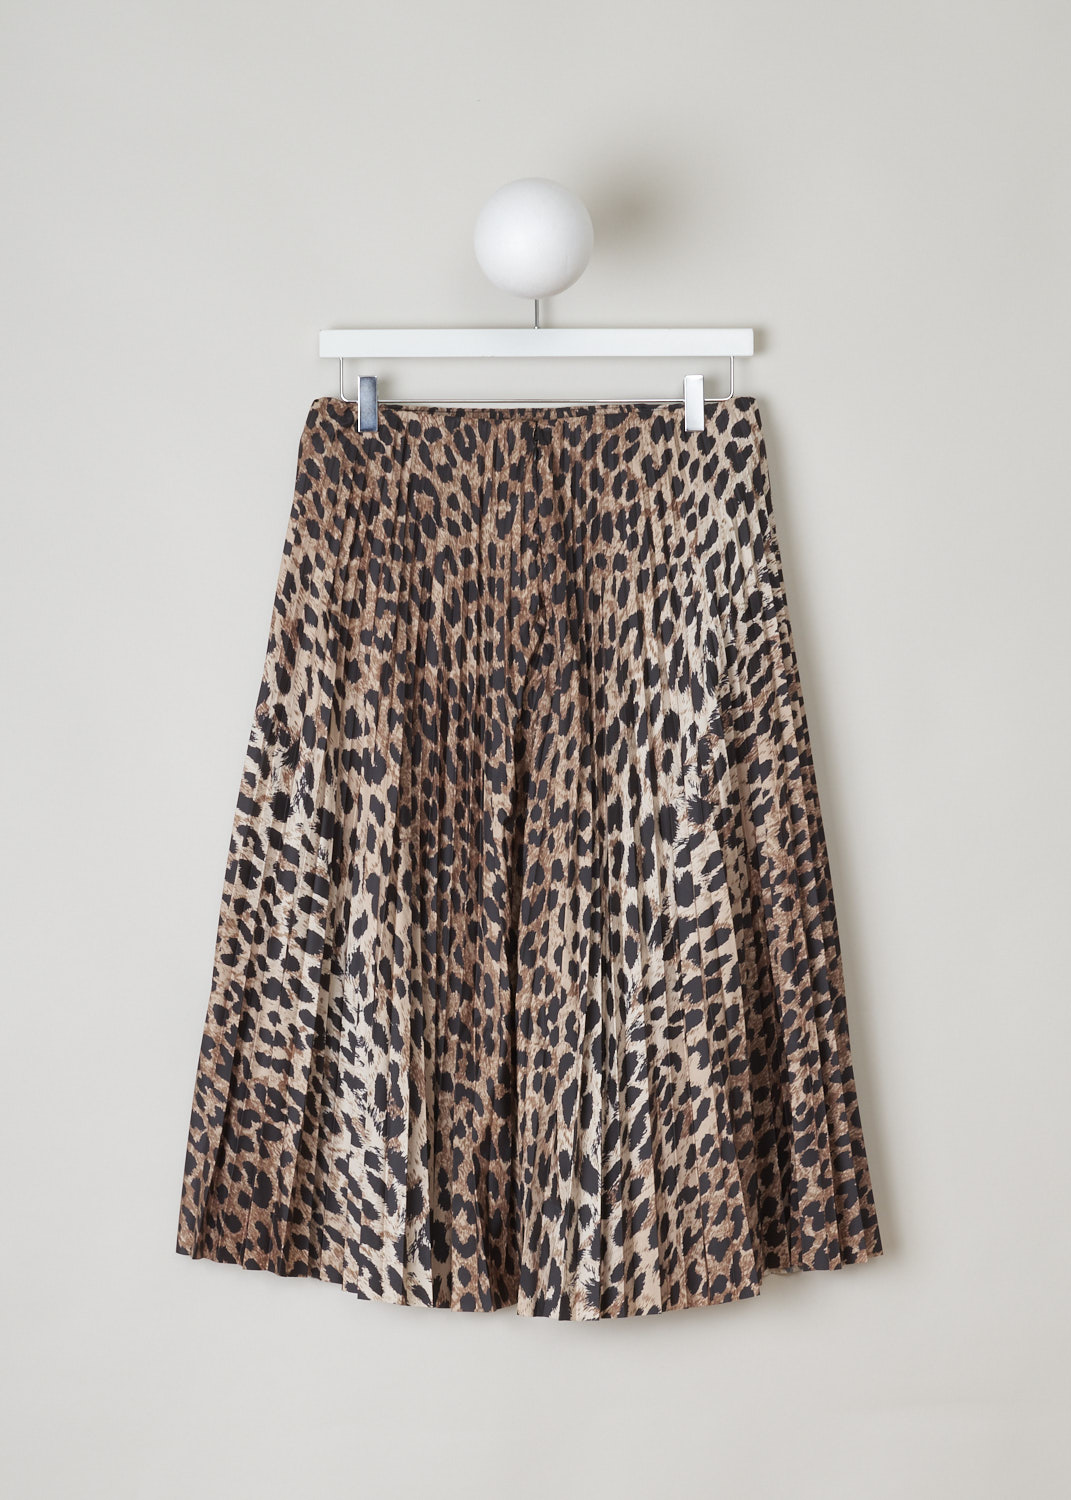 Balenciaga, Accordion pleated leopard print skirt, 601196_TGL35_9501, brown, beige, black, back, Mid-length accordion skirt, printed to a multi-coloured leopard motif. Comes with a broad internal elastic waistband, and has a concealed zipper on the back. 